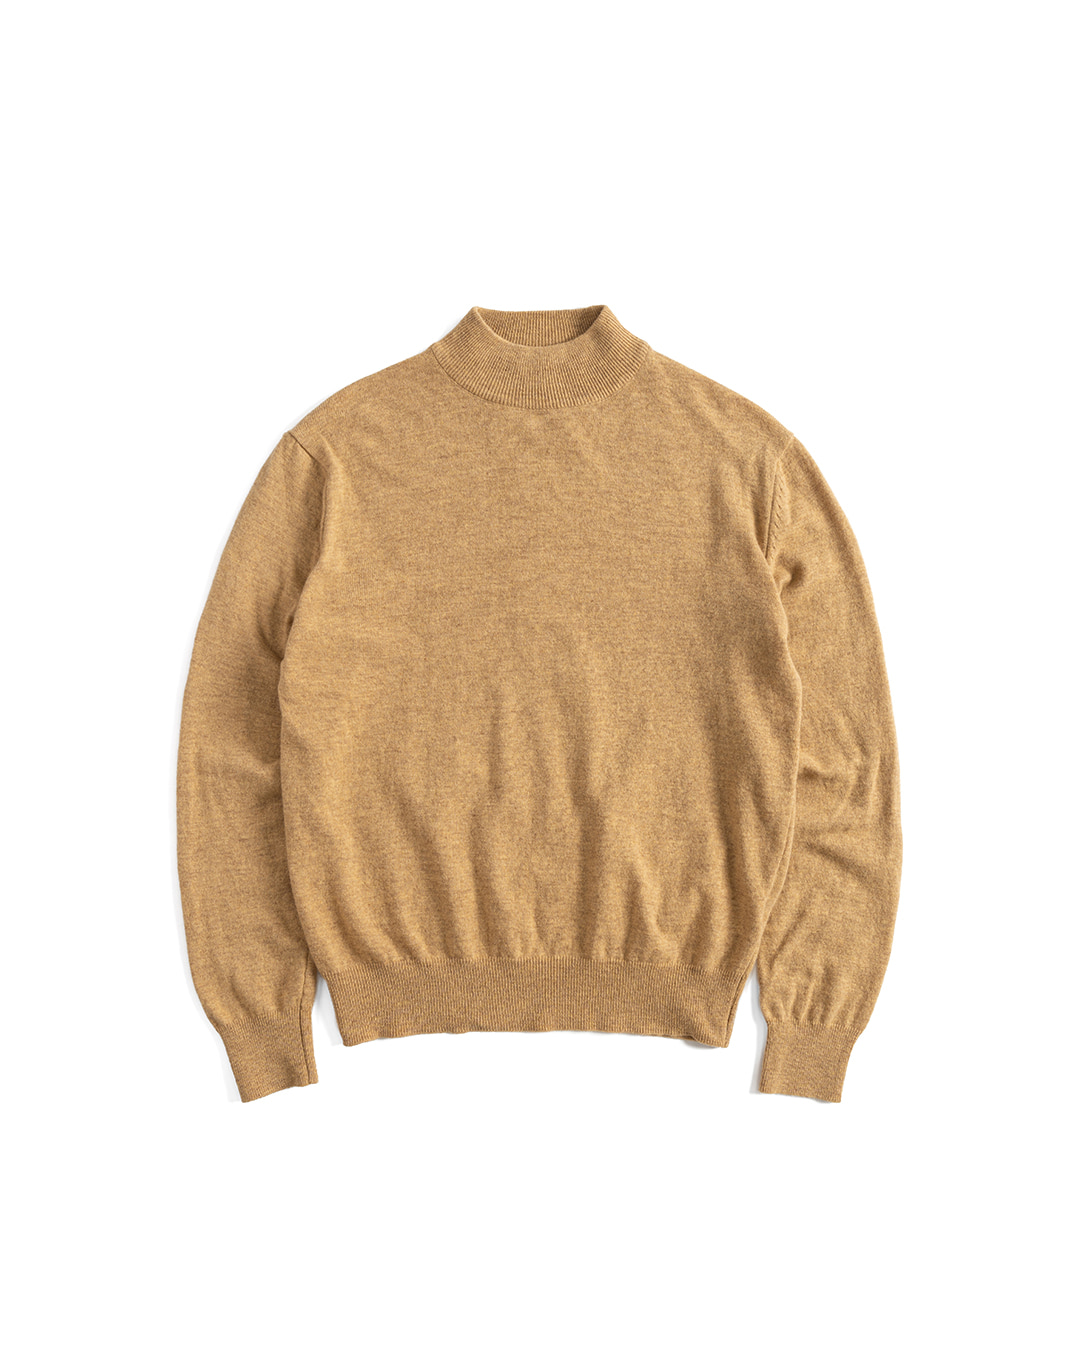 10 CASHMERE BLEND MOCK-NECK SWEATER (yellow)